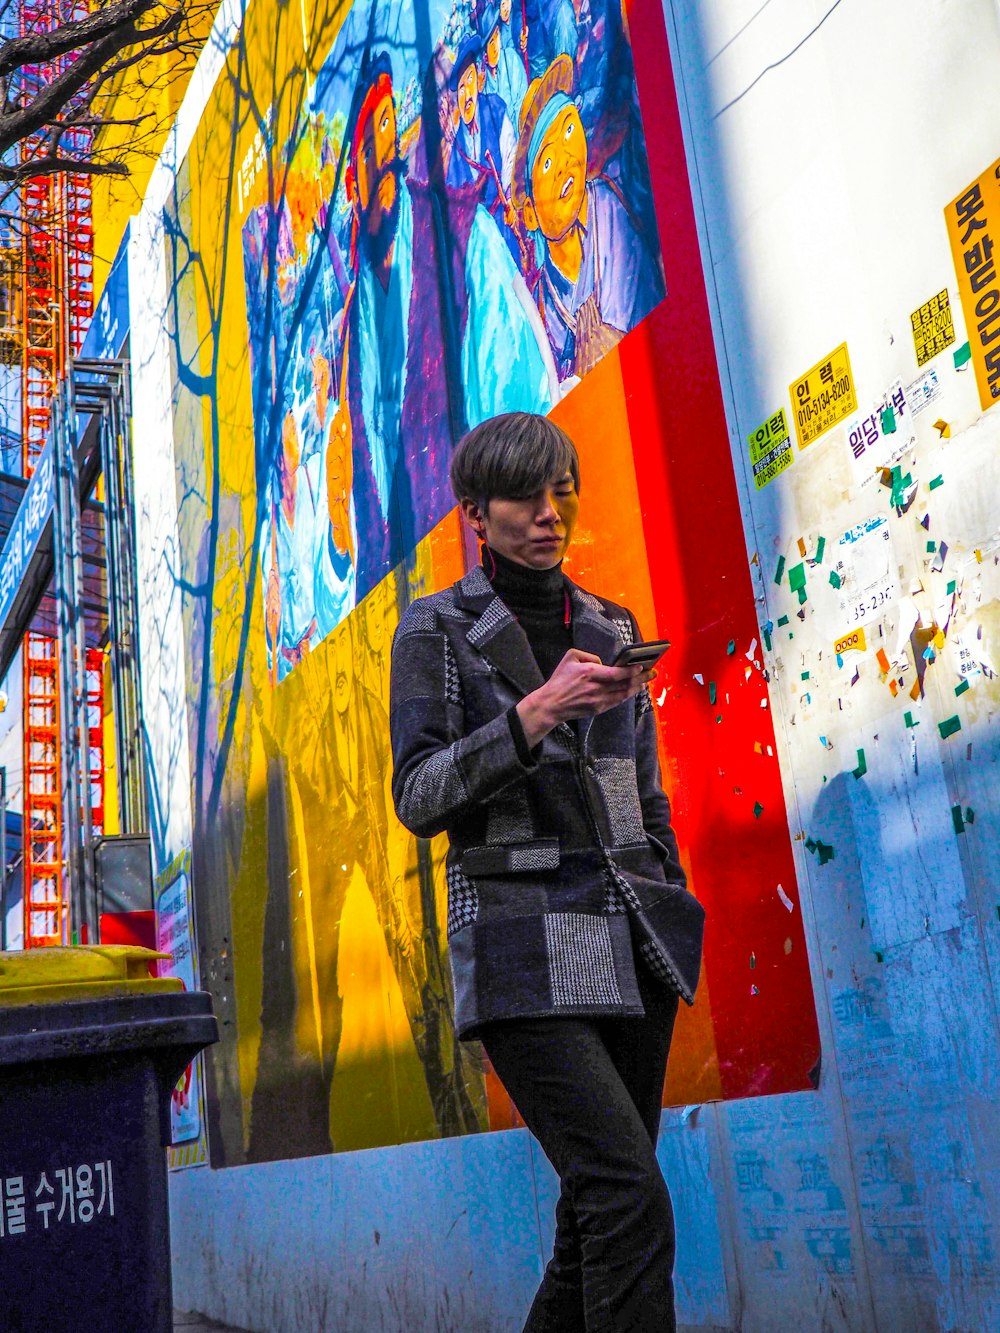 person in gray coat holding smartphone while walking near graffiti wall